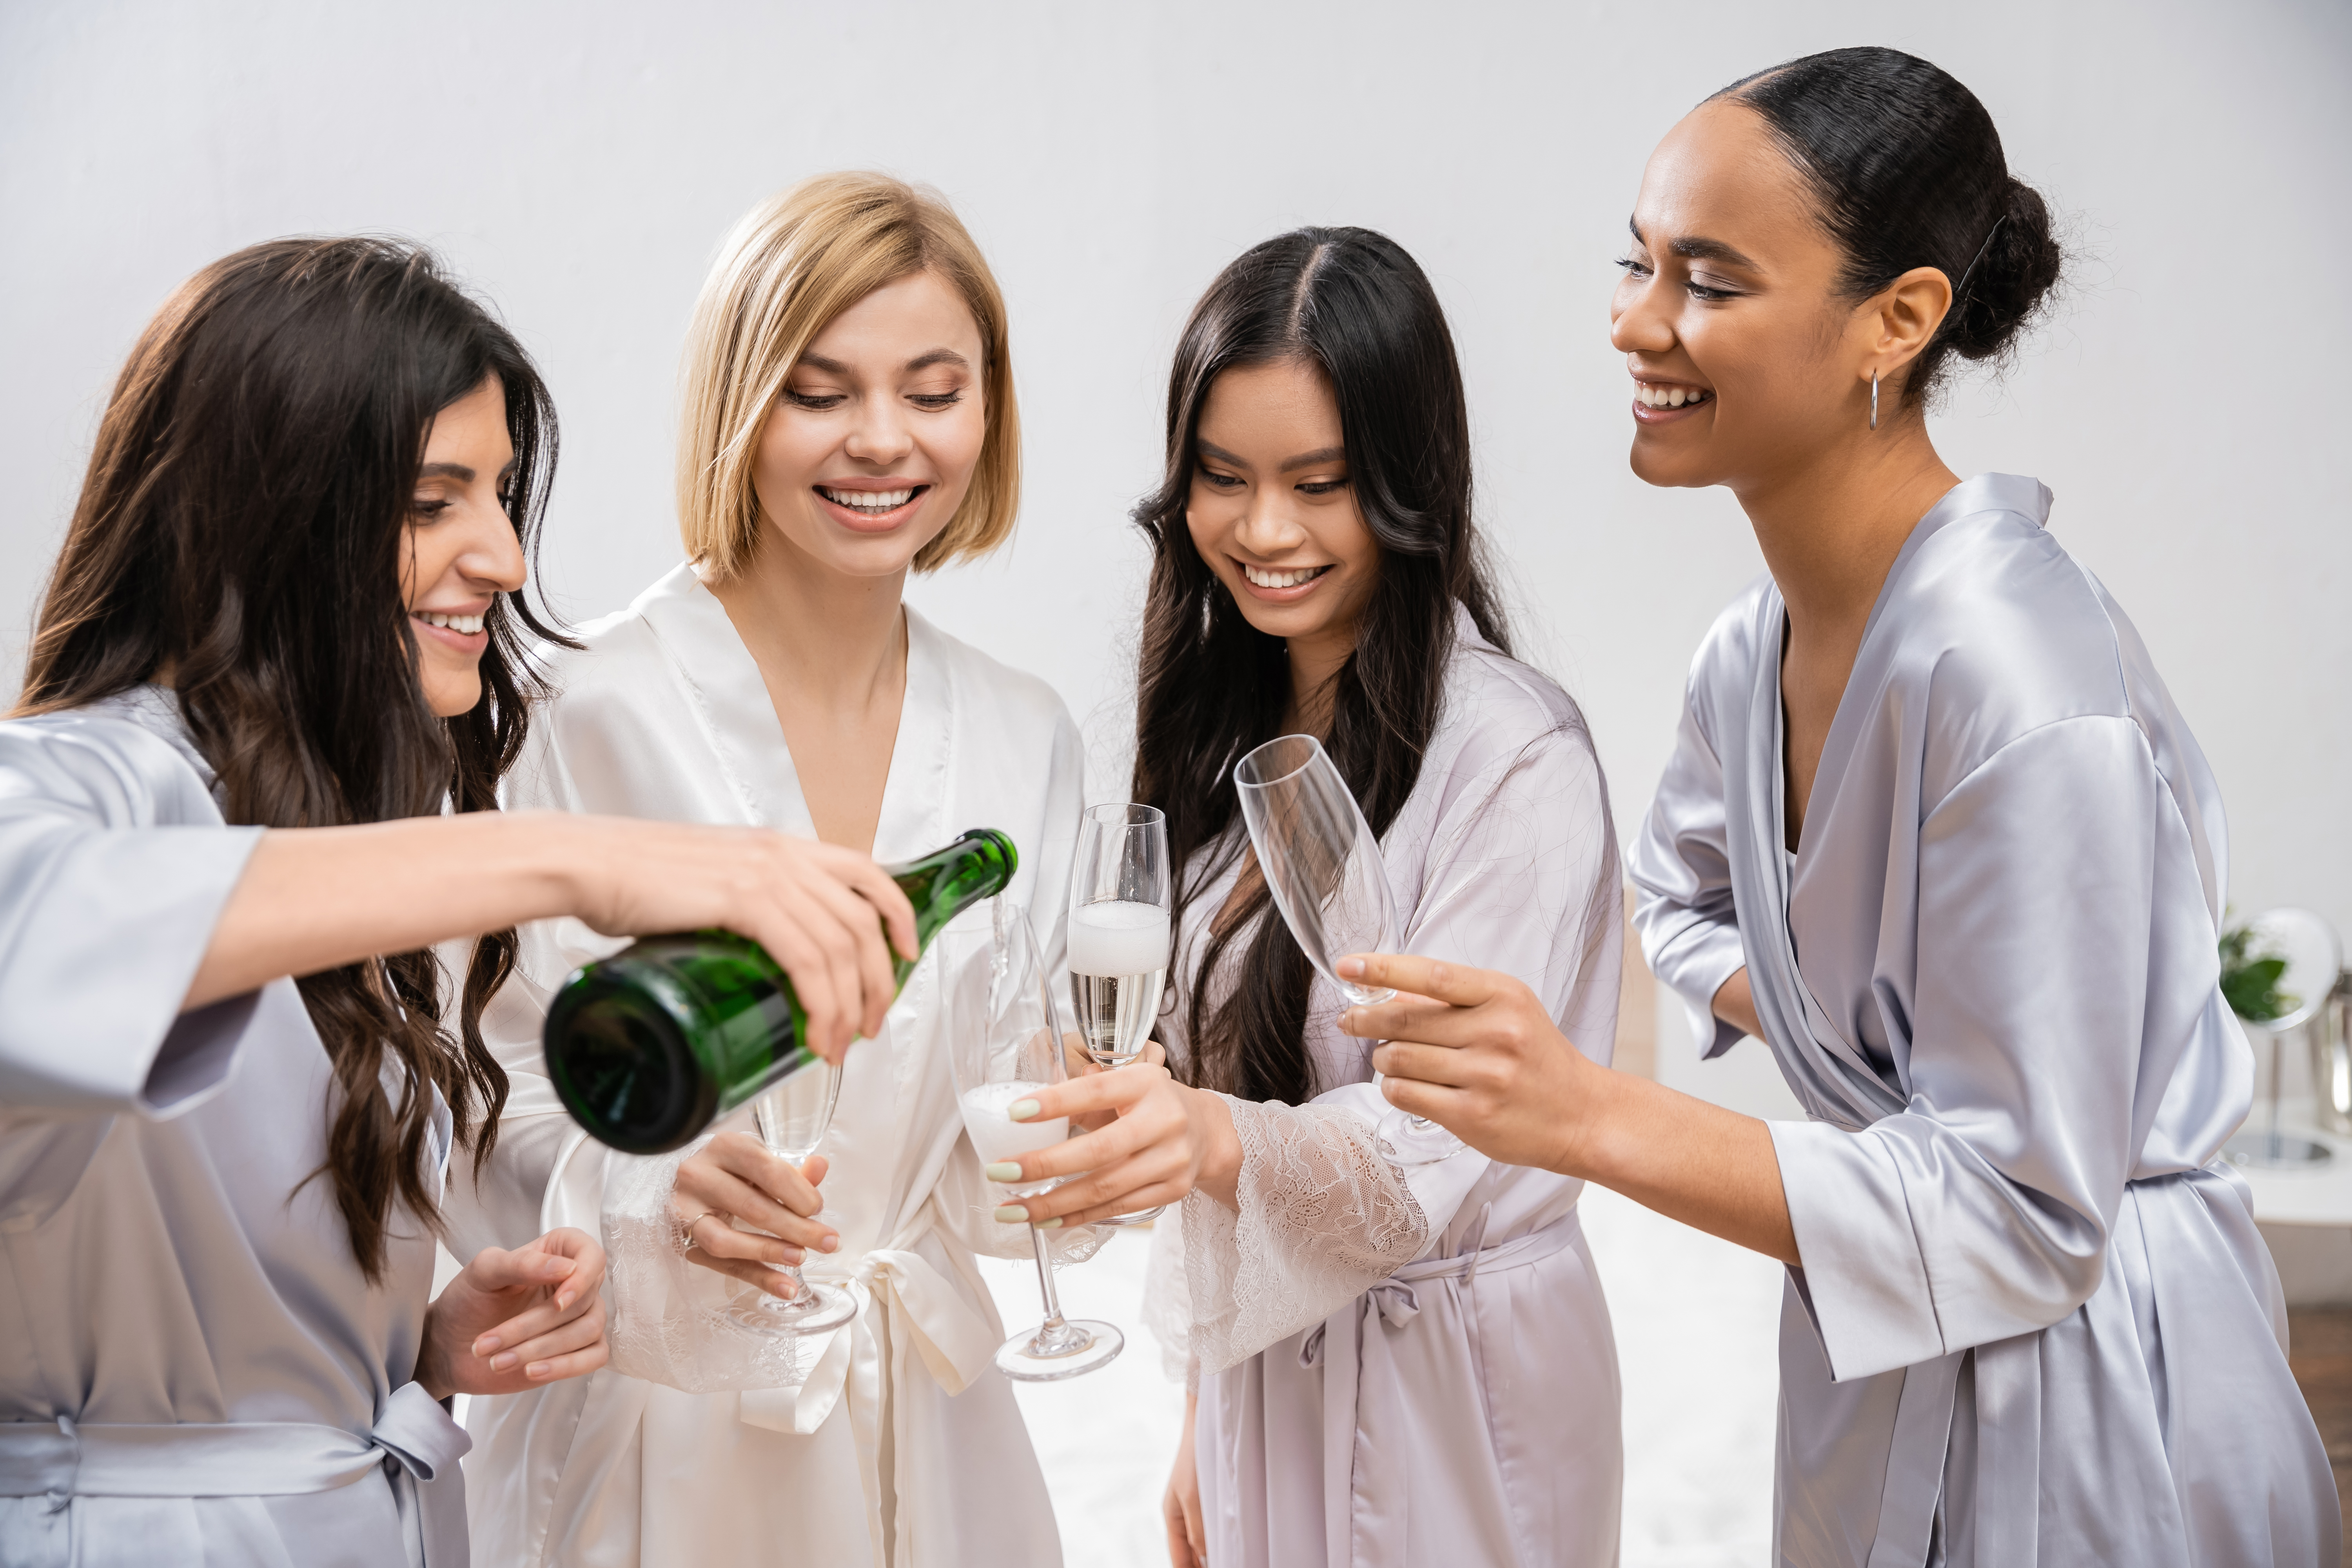 bridal shower, woman pouring champagne into glasses near interracial girlfriends, celebration